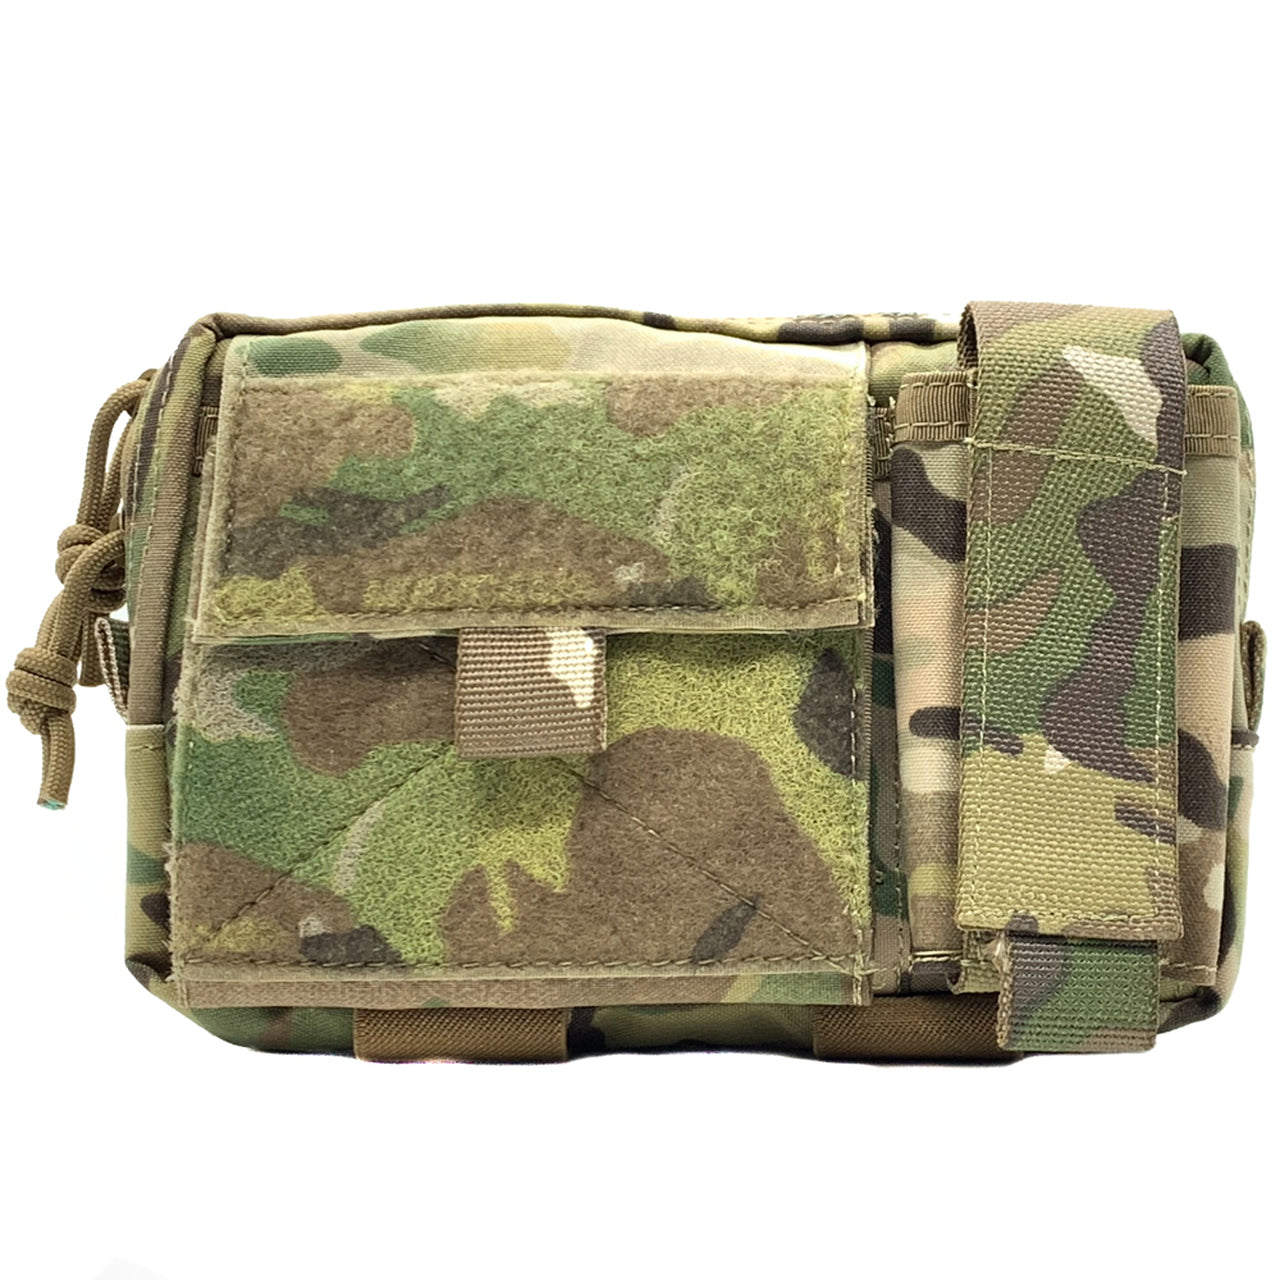 A Shellback Tactical Super Admin Pouch on a white background.